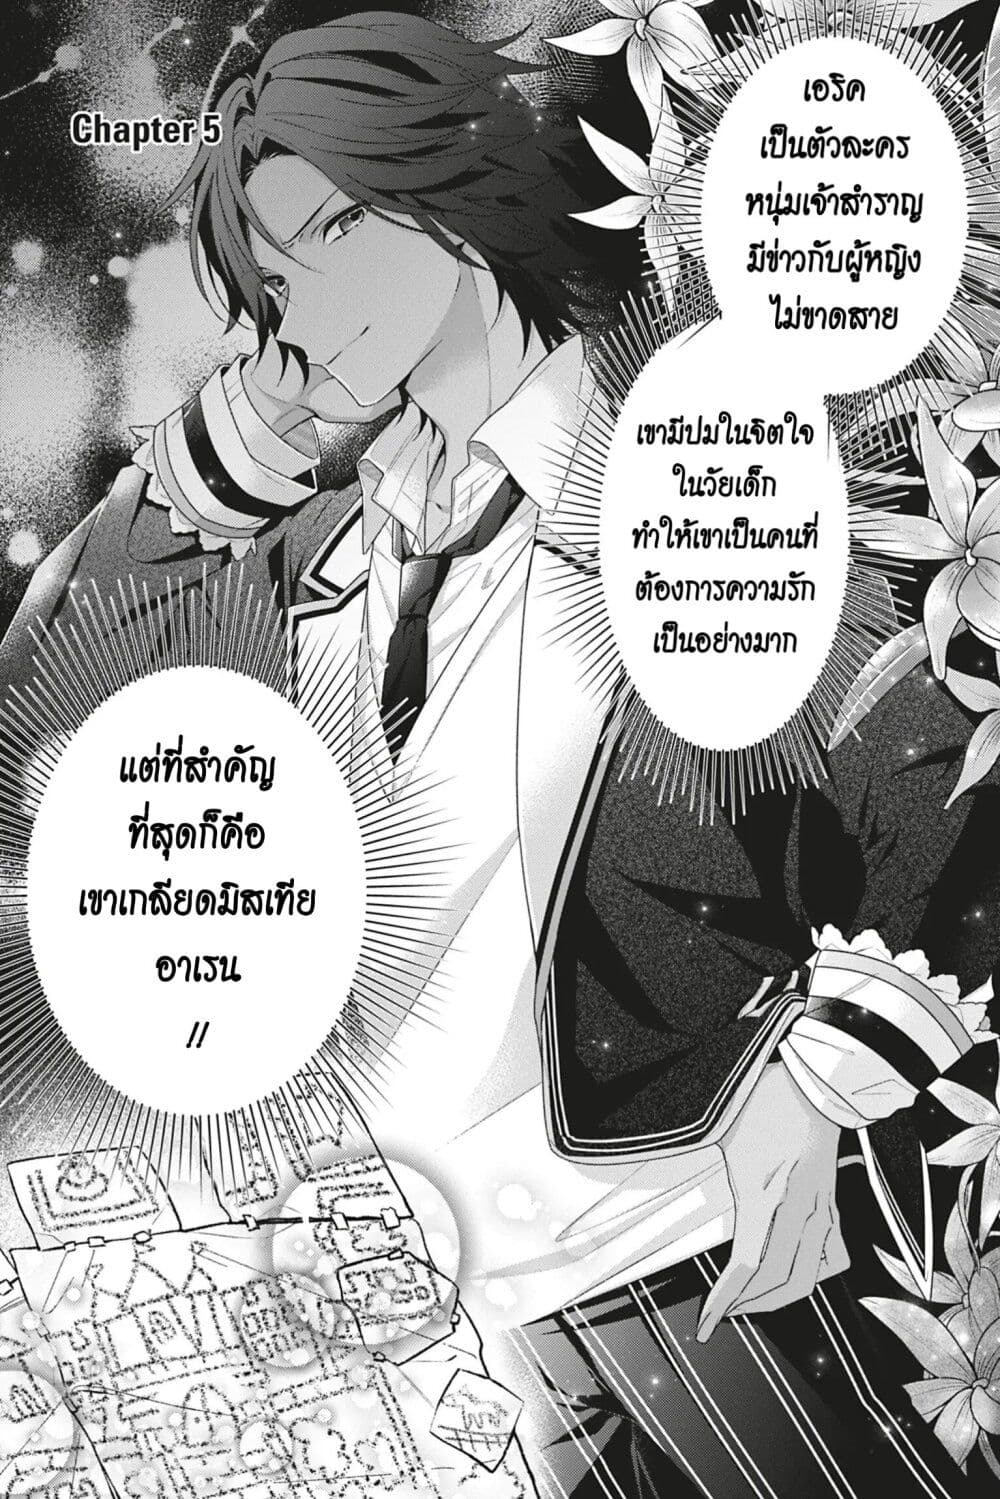 I Was Reincarnated as the Villainess in an Otome Game but the Boys Love Me Anyway! เกิดใหม่เป็นนางร้าย แต่เป้าหมายการจีบสุดจะไม่ปกติ !! 5-5